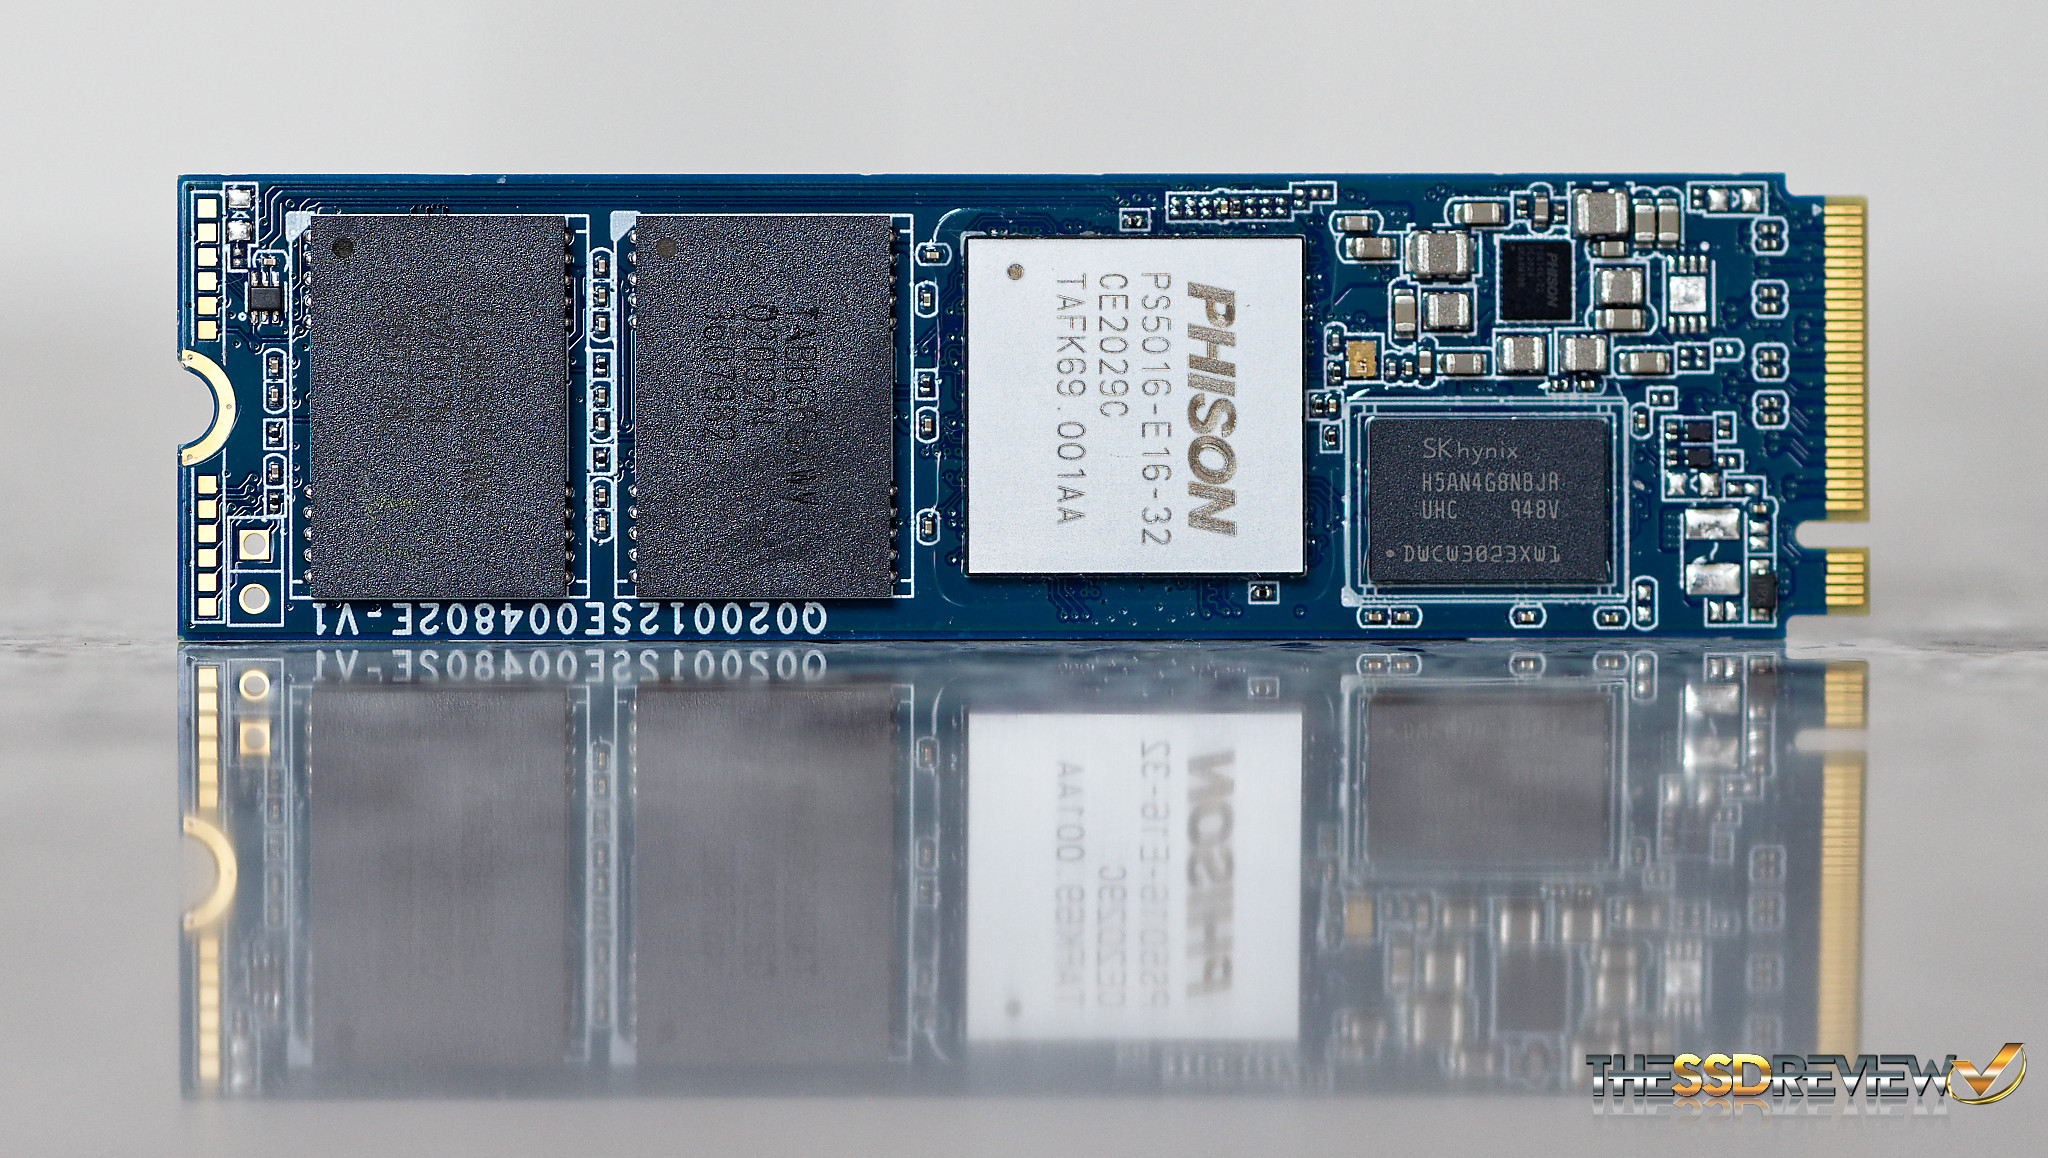 T-Create Classic 4 SSD Review - Testing our New Z590 Gen 4 Test Bench | The SSD Review